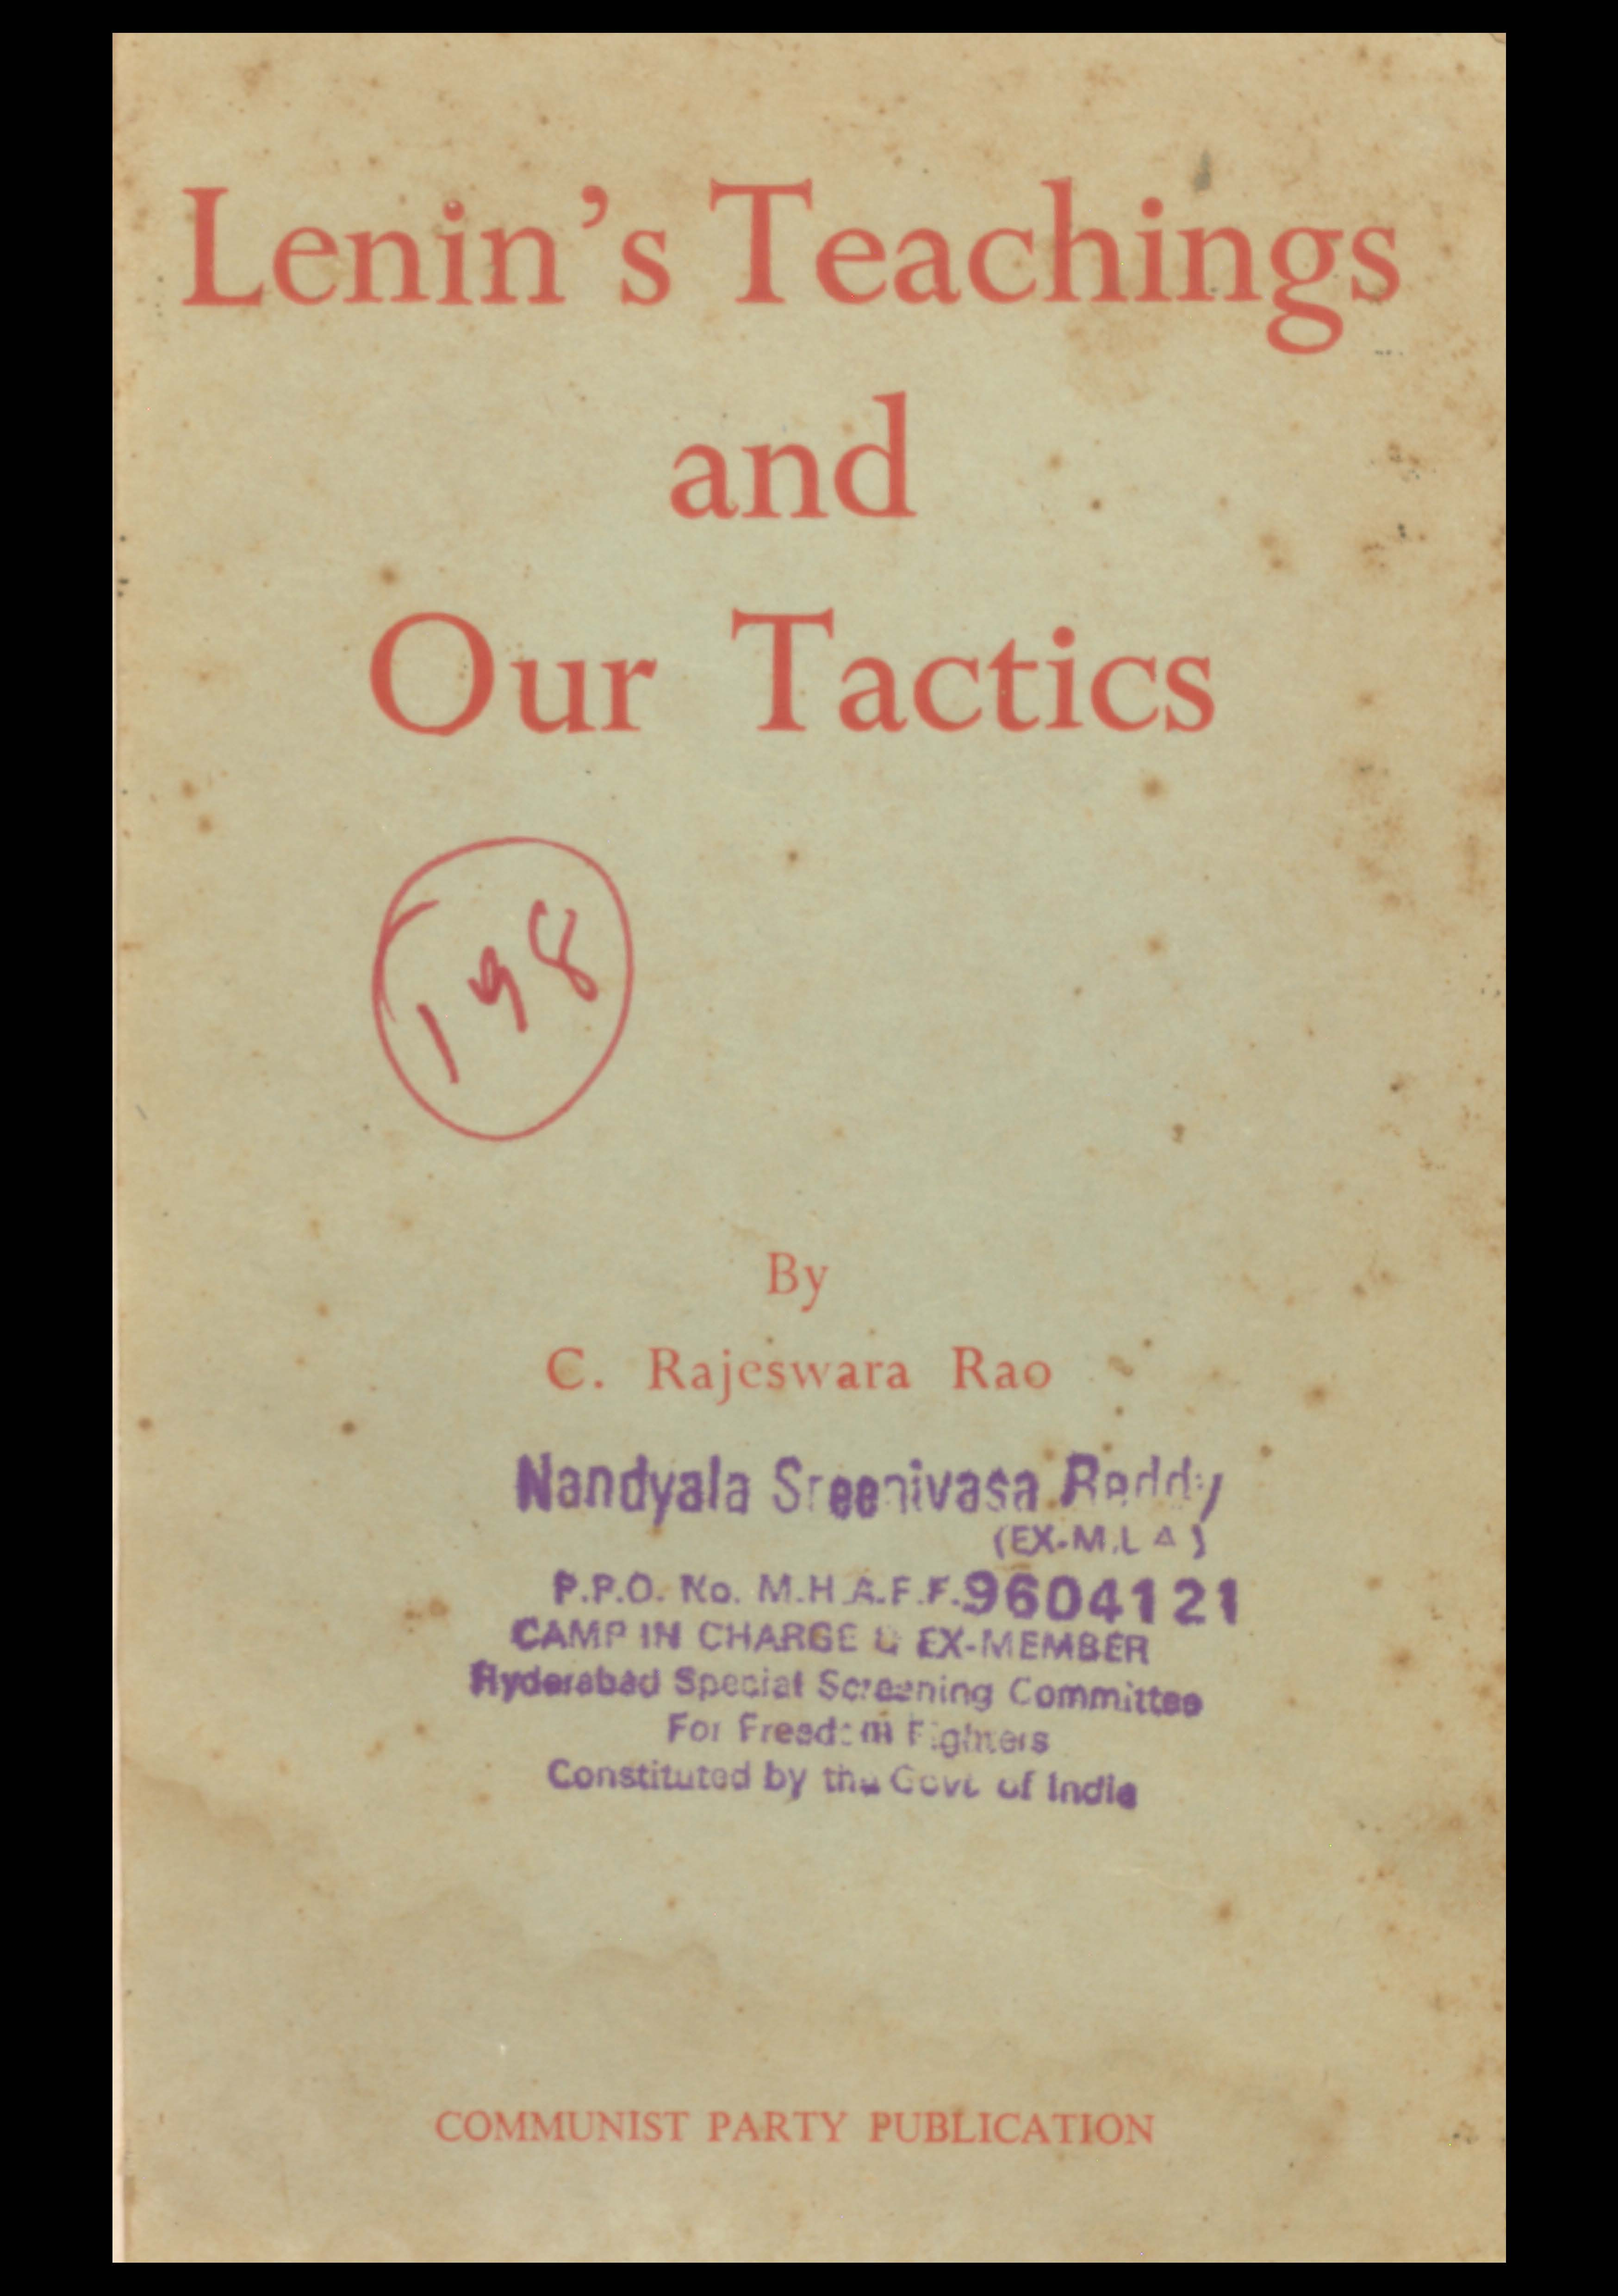 LENIN'S teachings and our tactice (communist party publication)